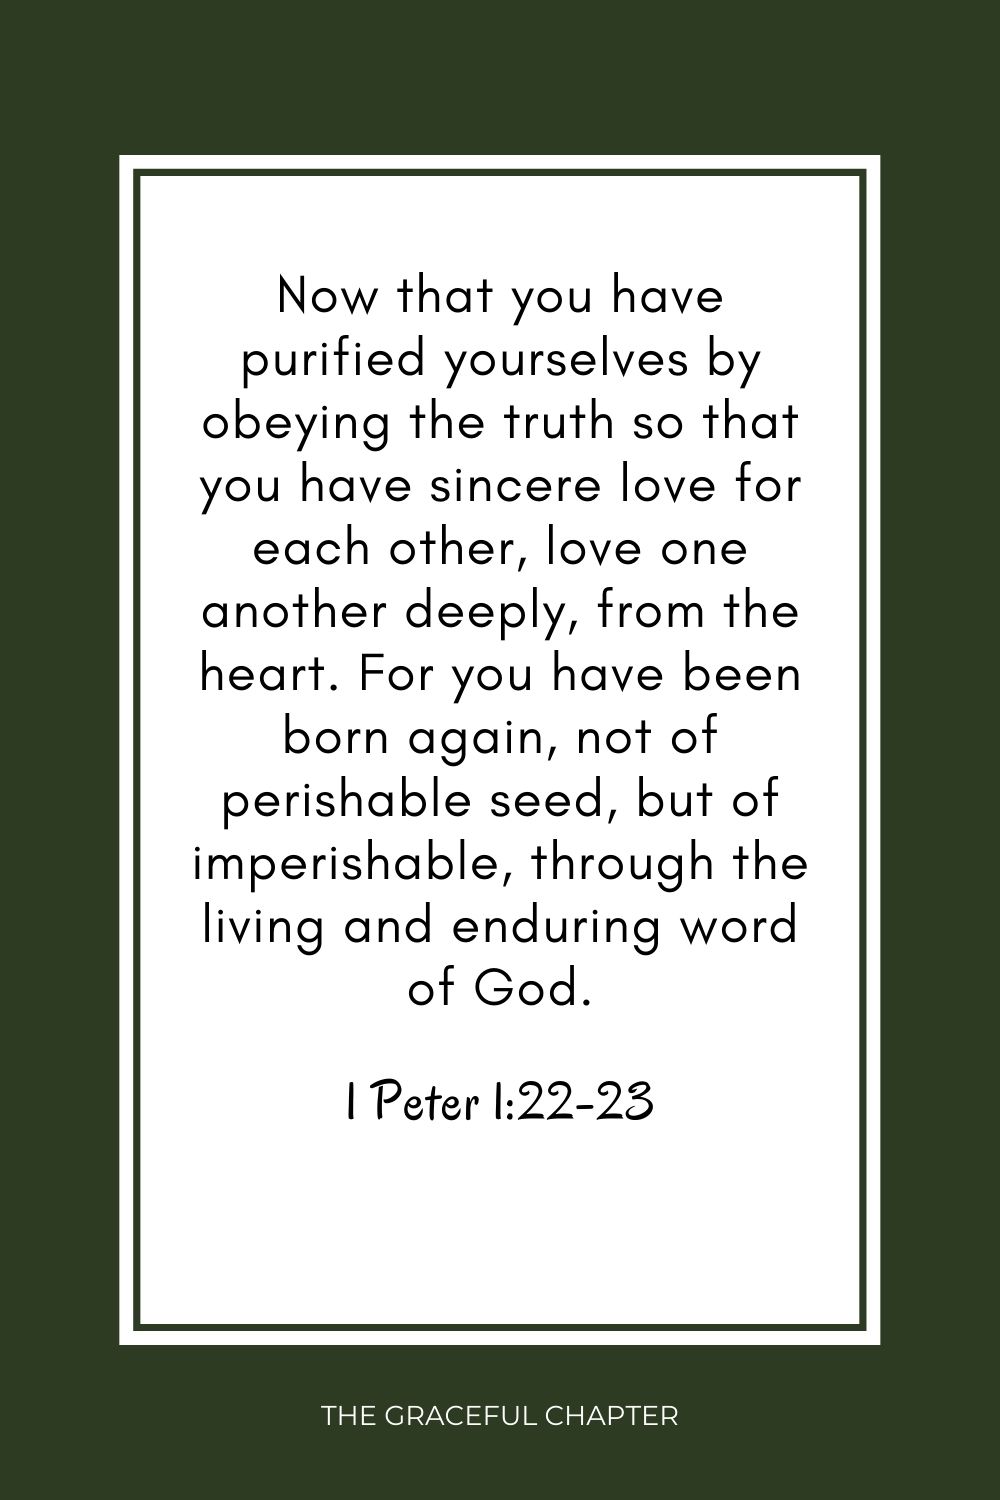 Now that you have purified yourselves by obeying the truth so that you have sincere love for each other, love one another deeply, from the heart. For you have been born again, not of perishable seed, but of imperishable, through the living and enduring word of God. 1 Peter 1:22-23